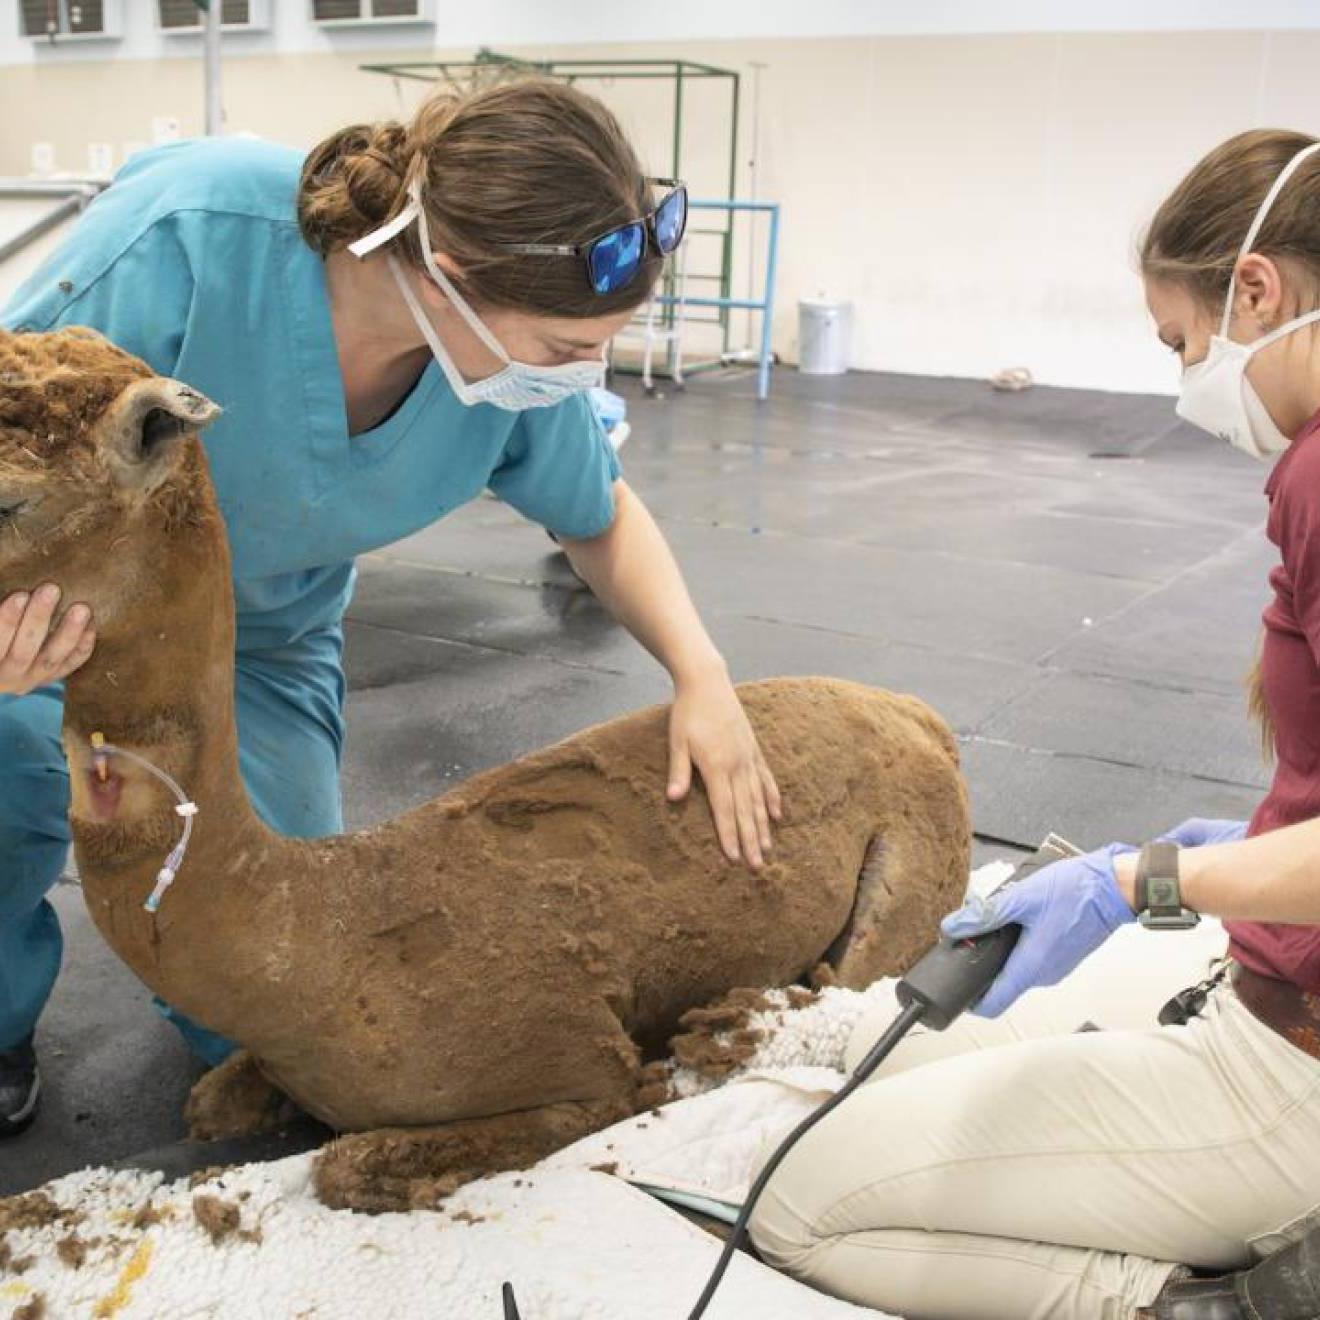 Two women in scrubs administer care while shaving an alpaca after a wildfire